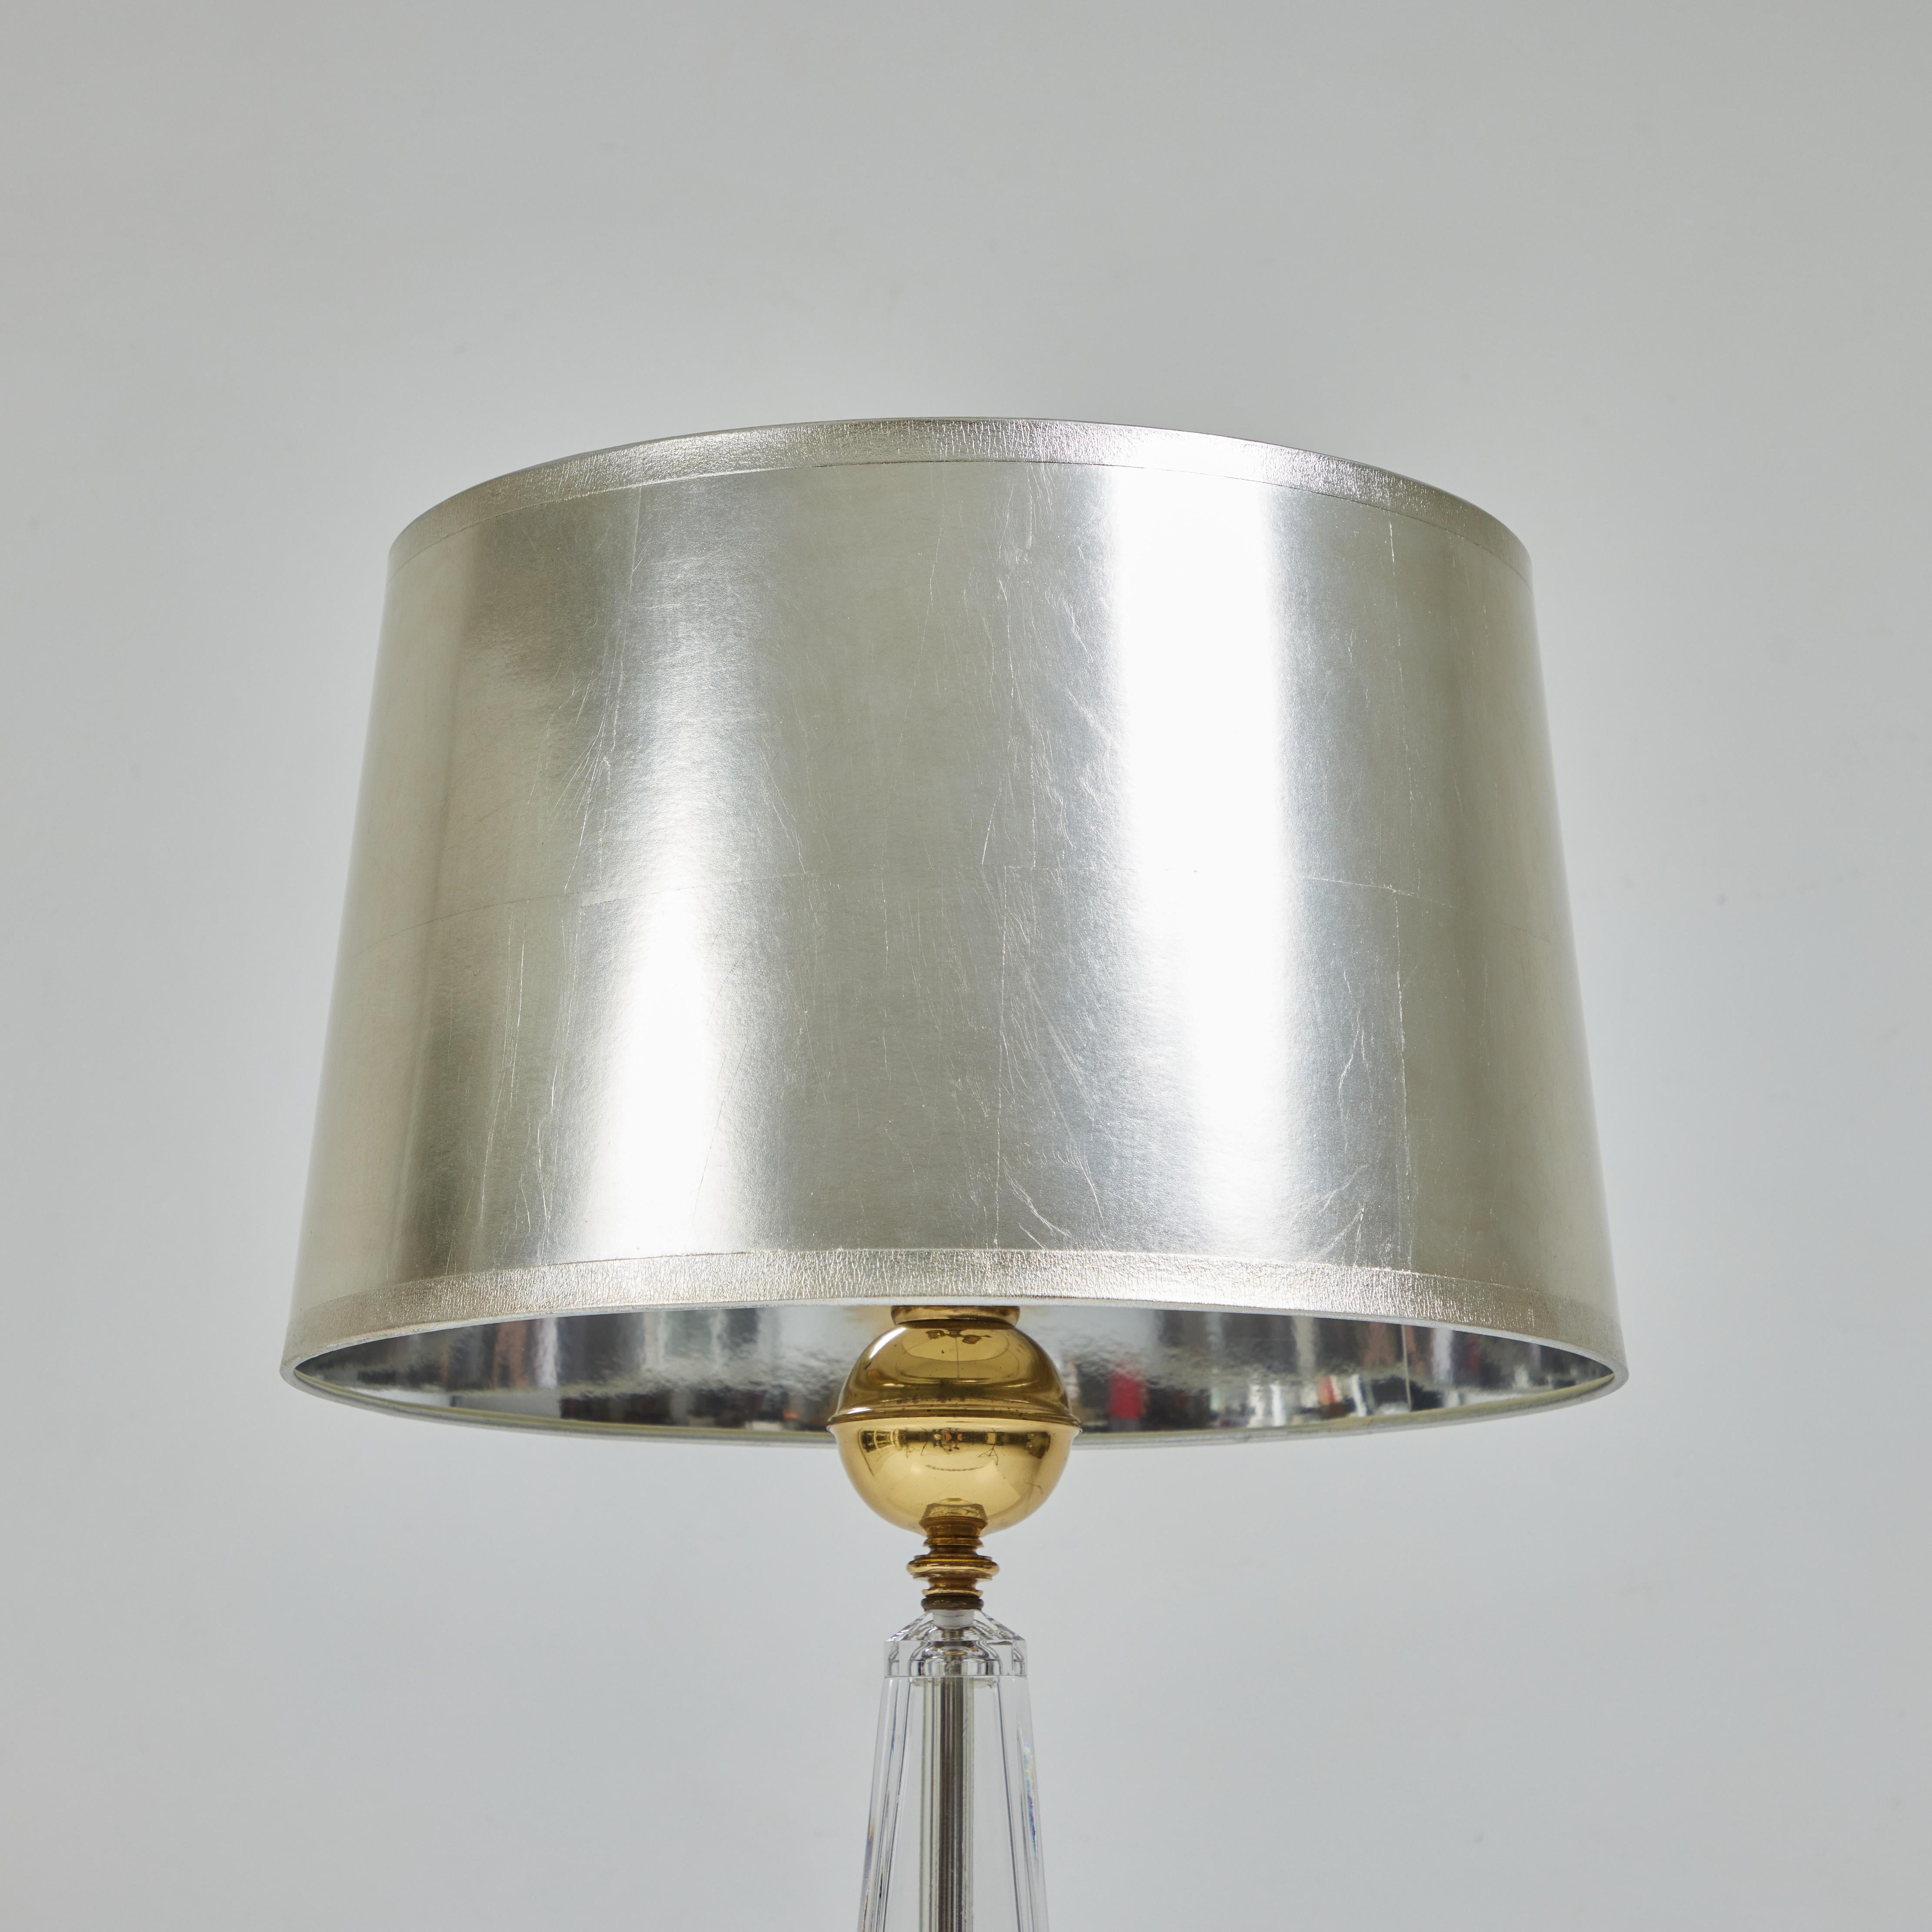 A Pair of Crystal Obelisk Lamps with Silver Leafed Shades, Chapman Lamps 1976 For Sale 2